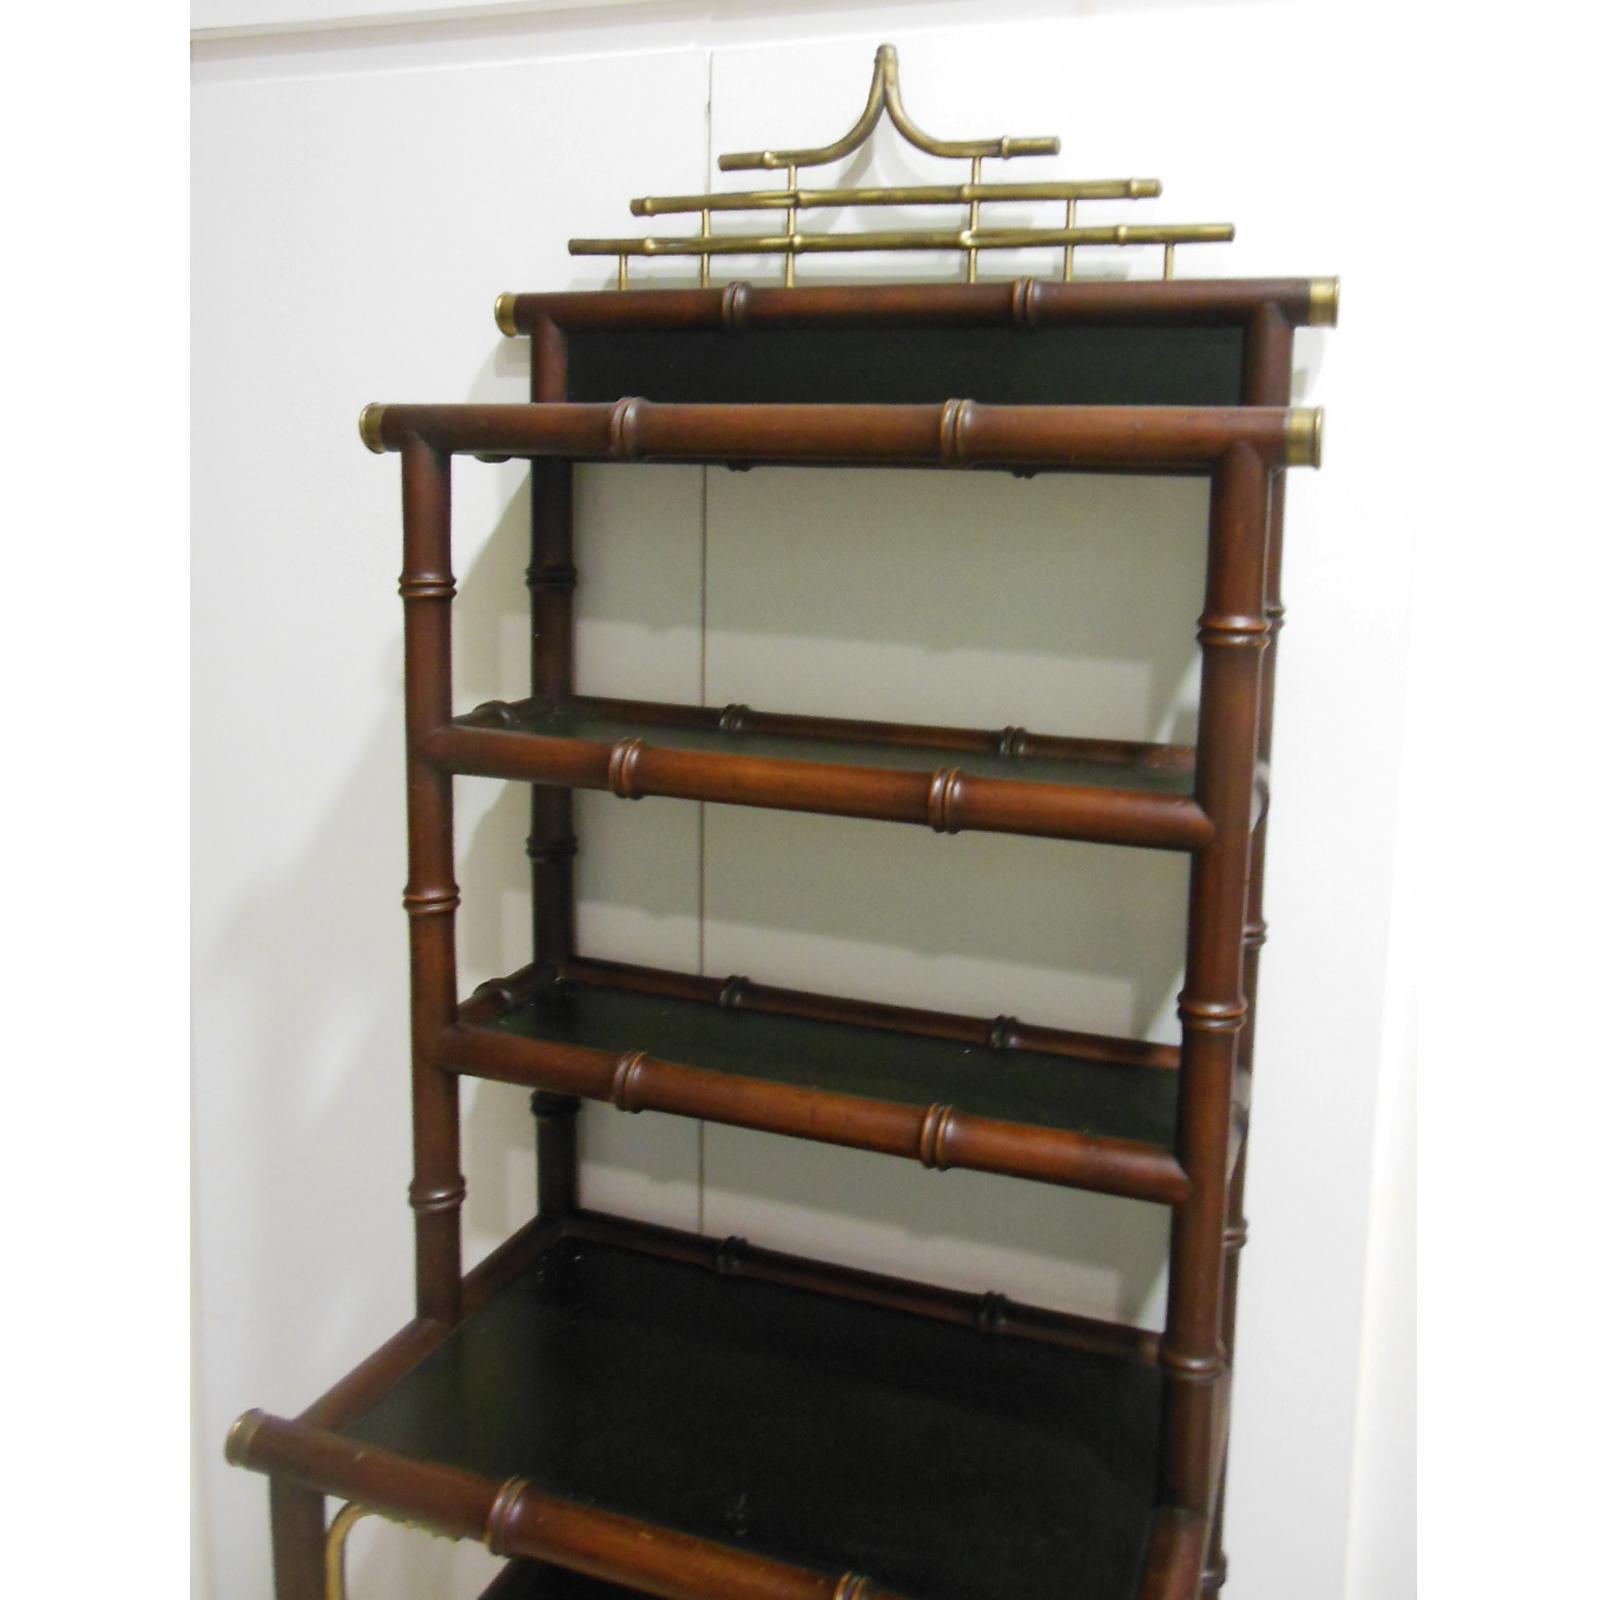 Chinese Chippendale Style shelves features pagoda form, 1950s

Has 4 shelves in the lower parade and 3 in the narrower upper one

Made of fine wood in the shape of faux bamboo and brass on the links and the upper part of the pagoda and green